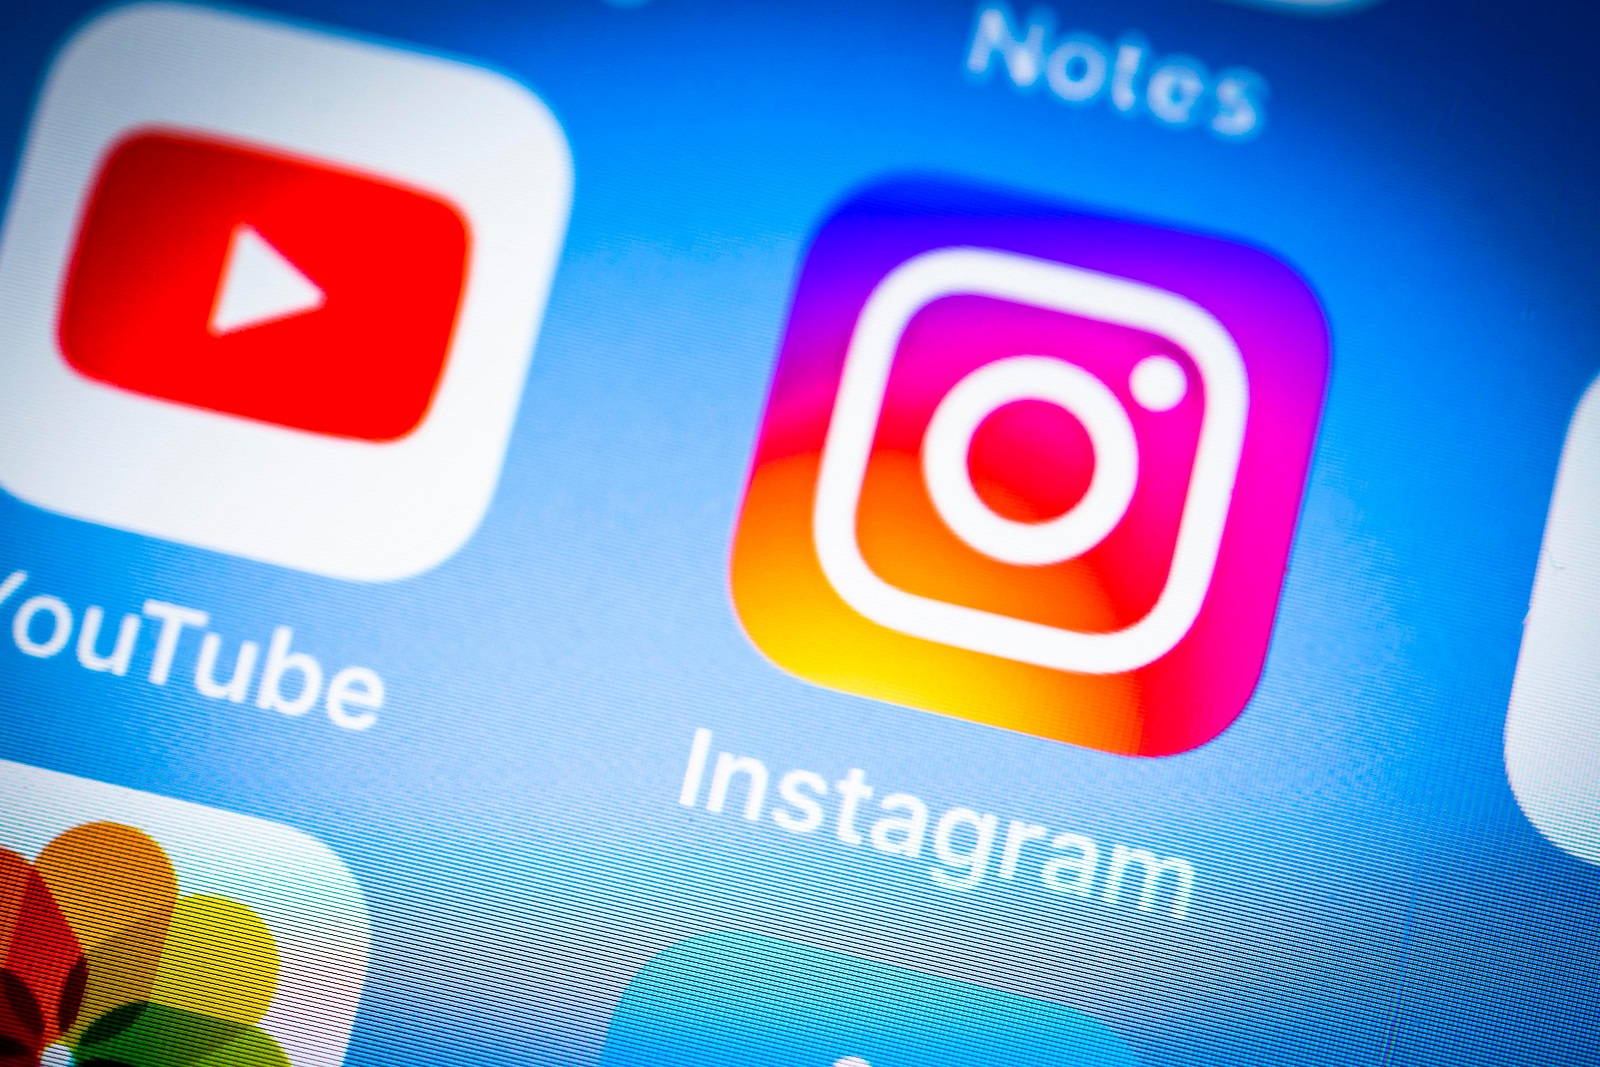 Instagram assures users that it isn't limiting the reach of their posts